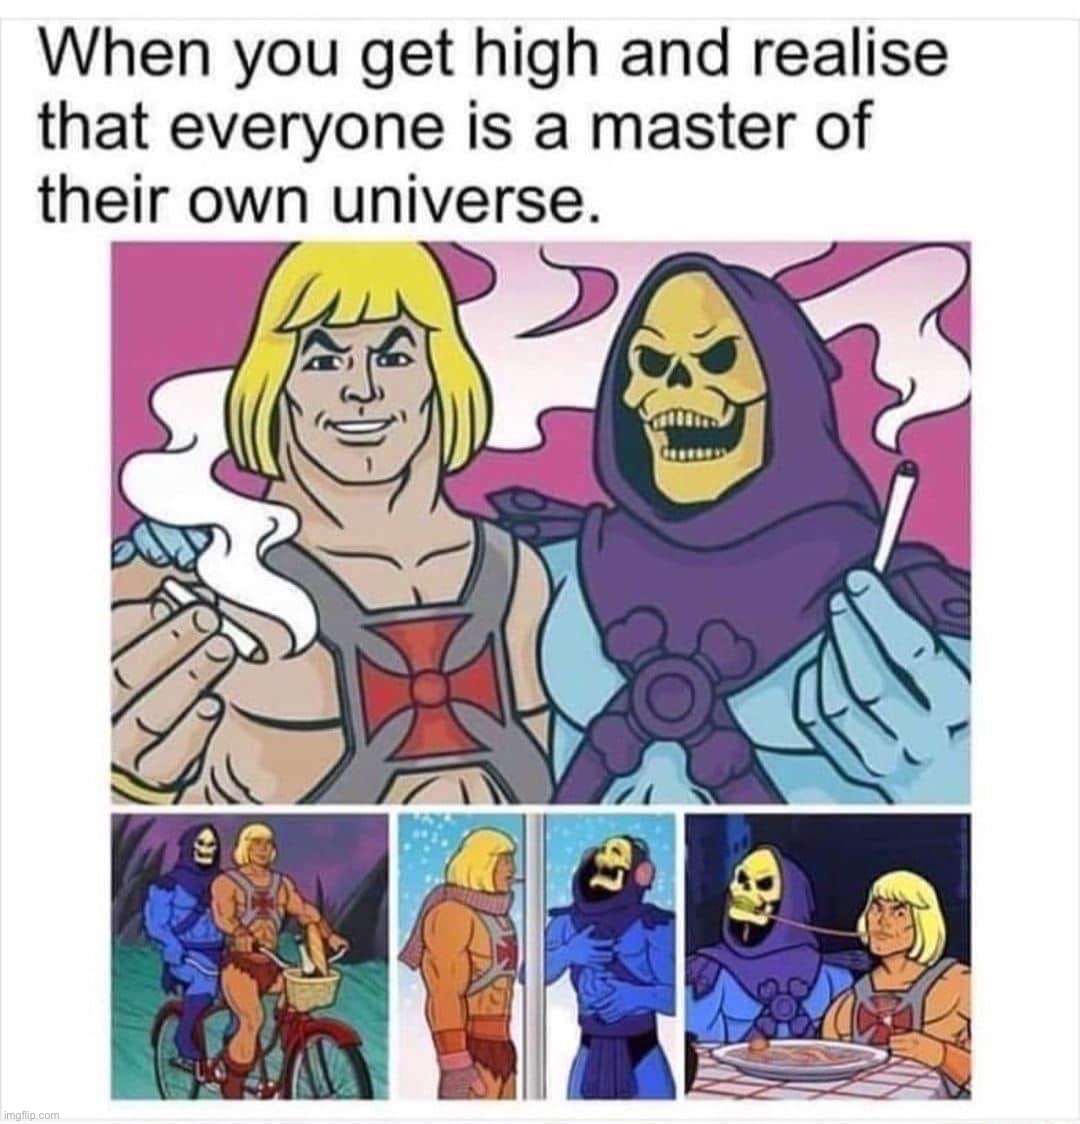 Everyone is a master of their own universe | image tagged in everyone is a master of their own universe | made w/ Imgflip meme maker